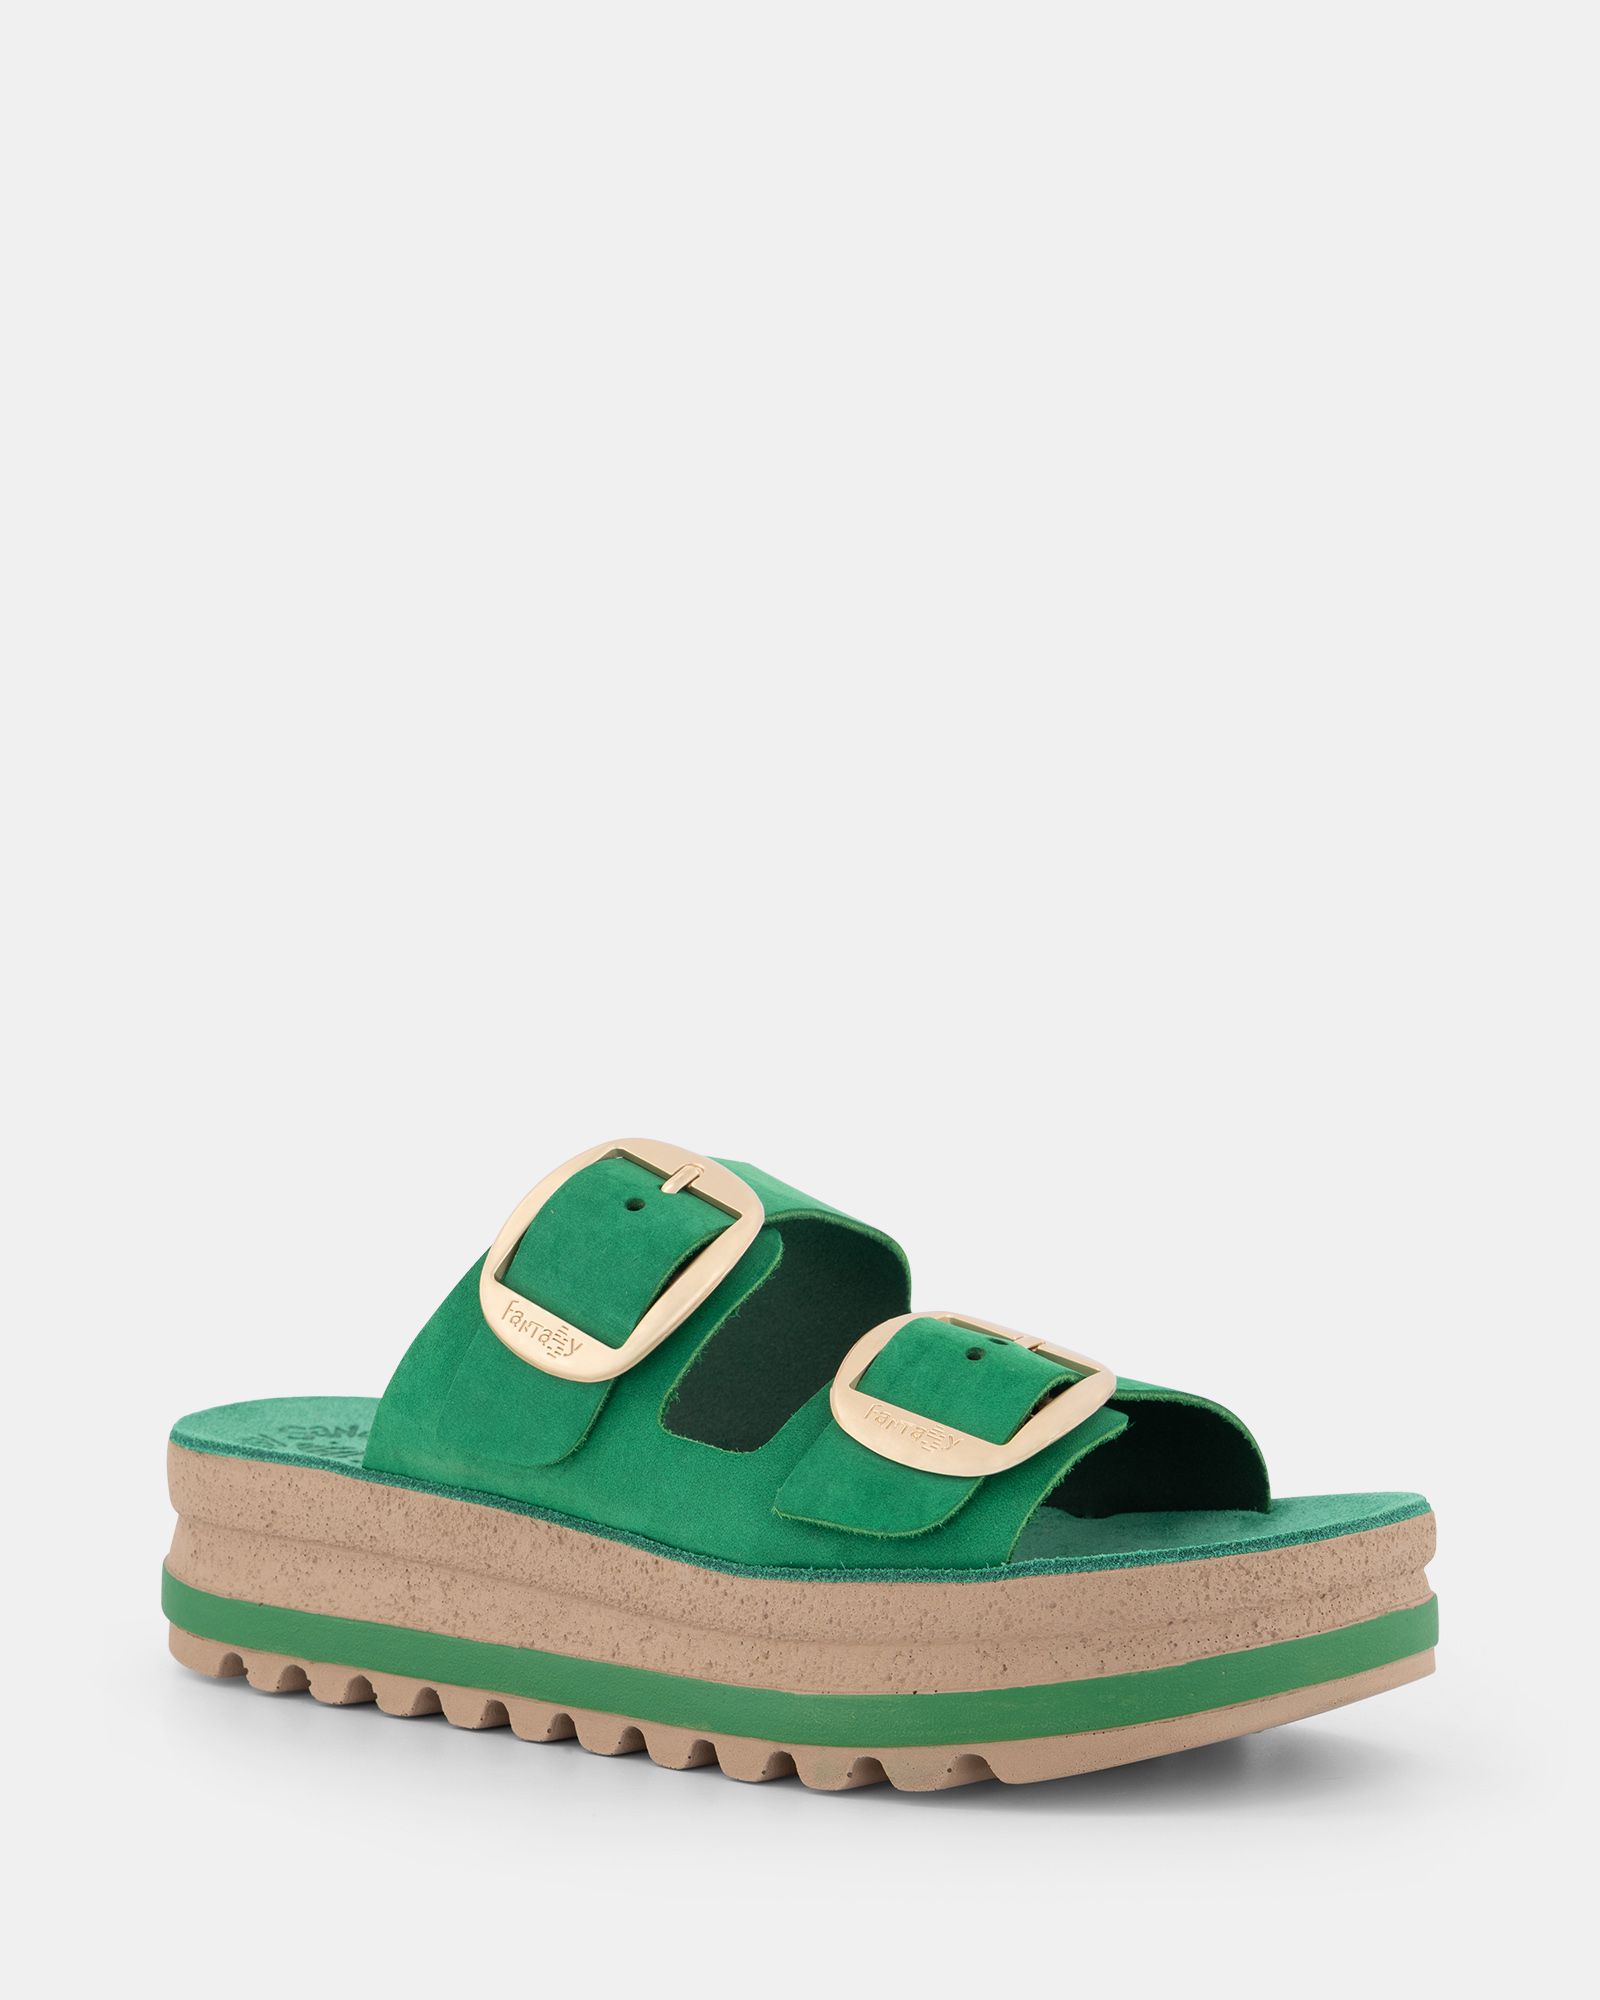 Buy GOGO Green sandals Online at Shoe Connection